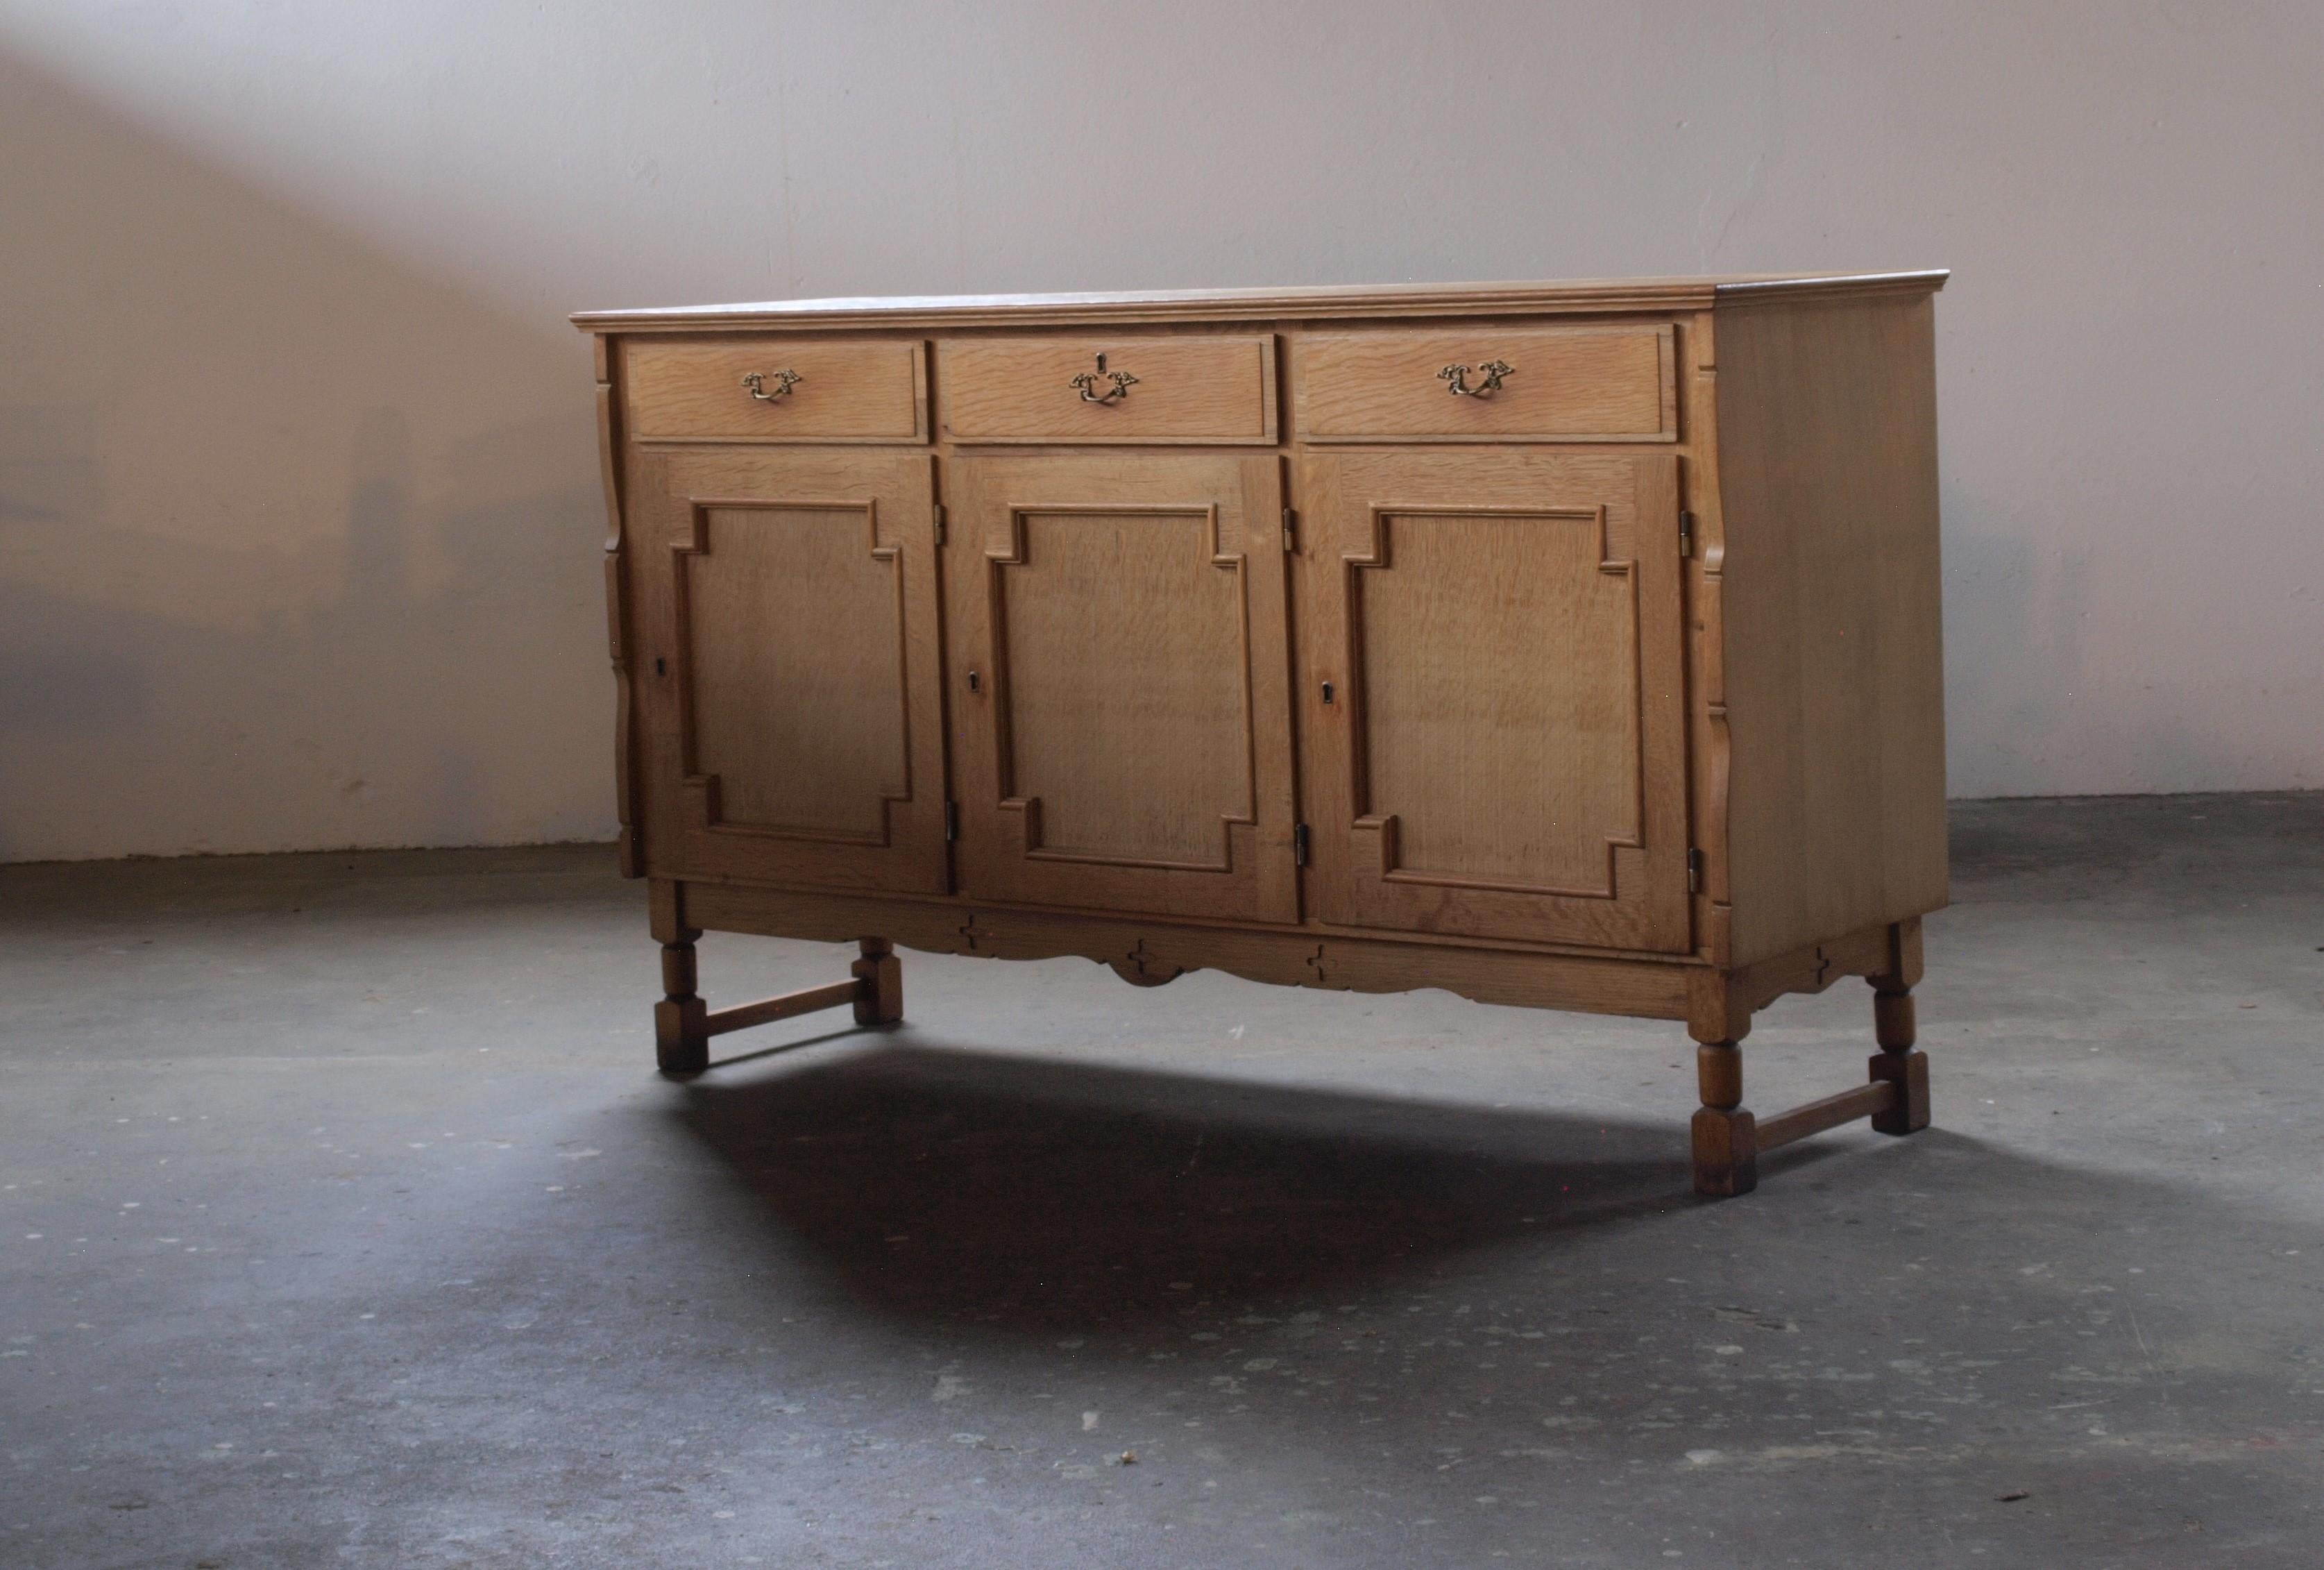 Exquisite brutalist-style sideboard by G.D. Egereoler, reminiscent of 1960s design akin to Henning Kjærnulf. The sideboard, once adorned with a top, now boasts a unique patina, with subtle wood tone variations where the sun has kissed its surface—a